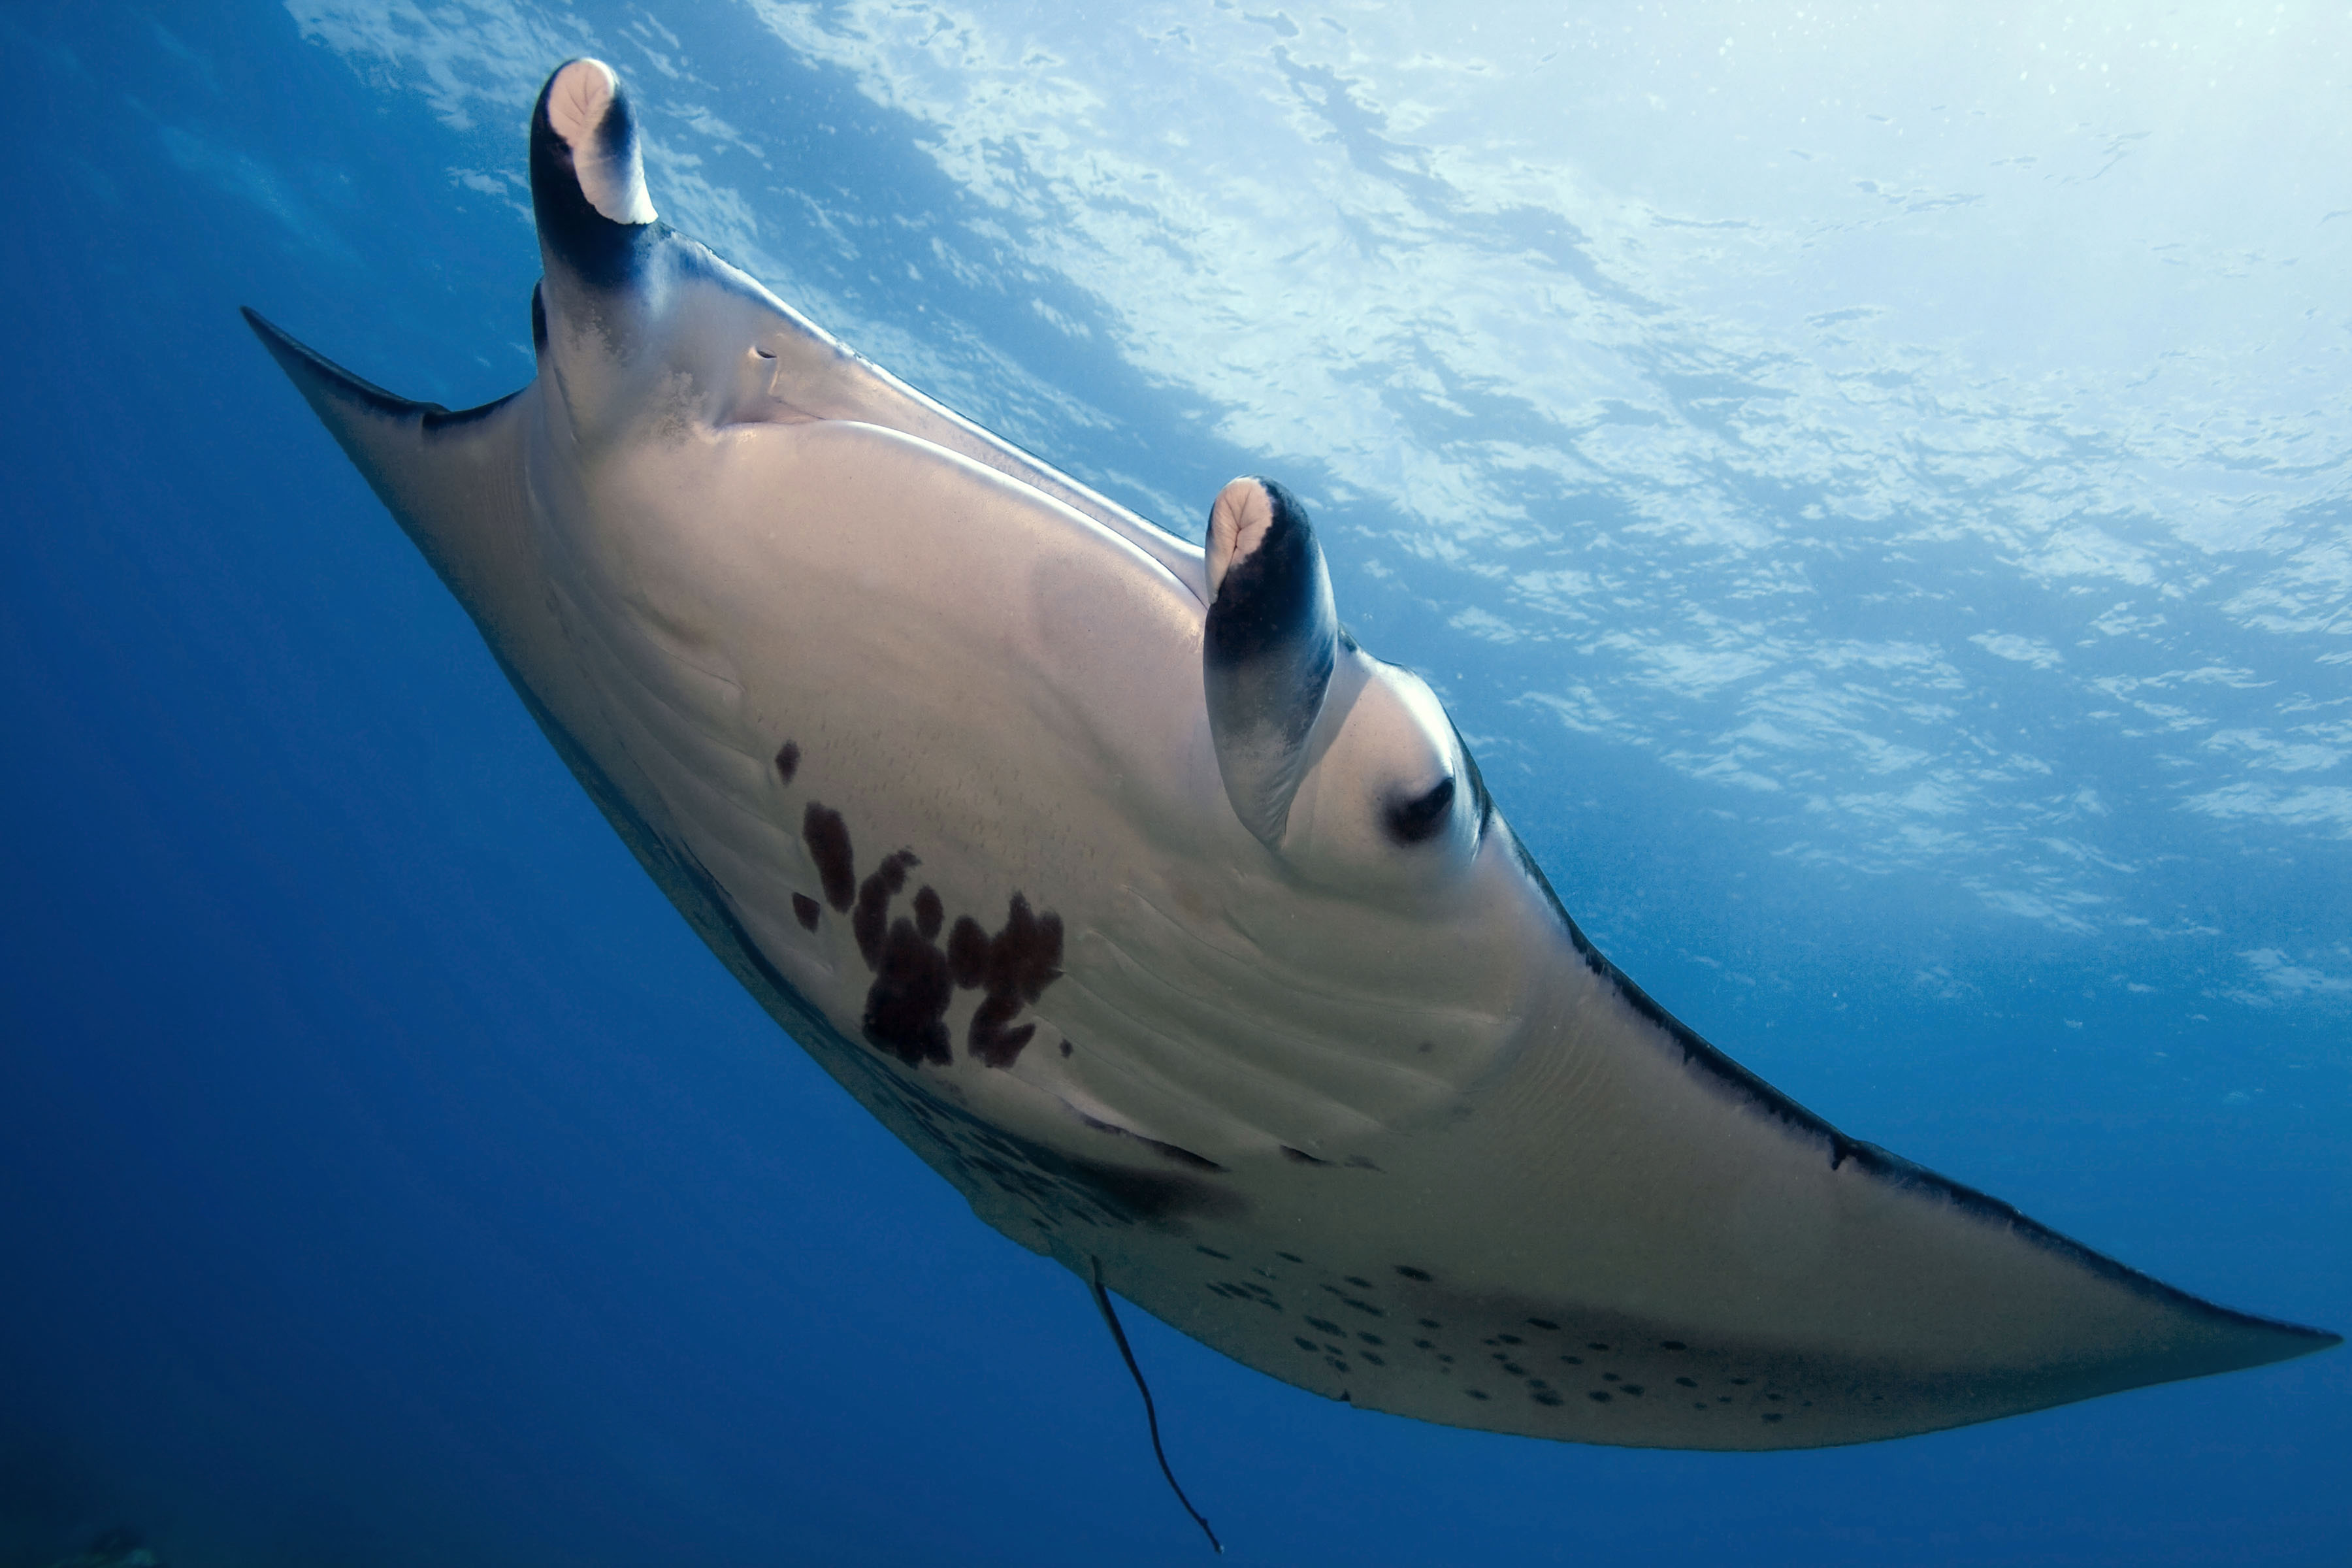 Manta rays at Keauhou Bay on the Big Island (photo provided by Second Wave Ocean Images for Sheraton Kona)